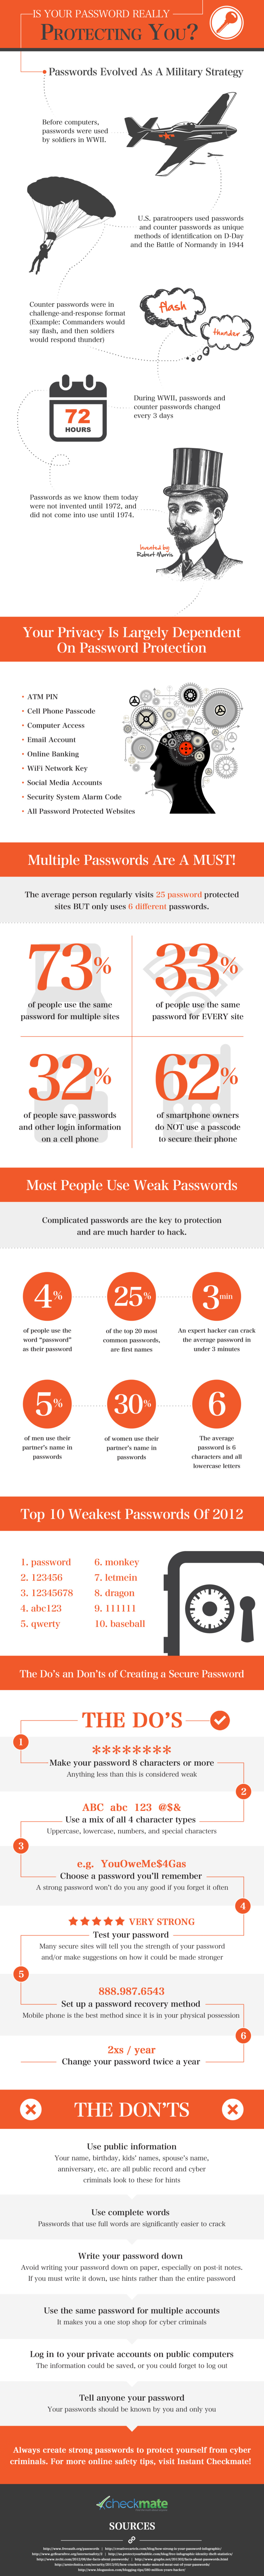 Is Your Password Really Protecting You? [INFOGRAPHIC]